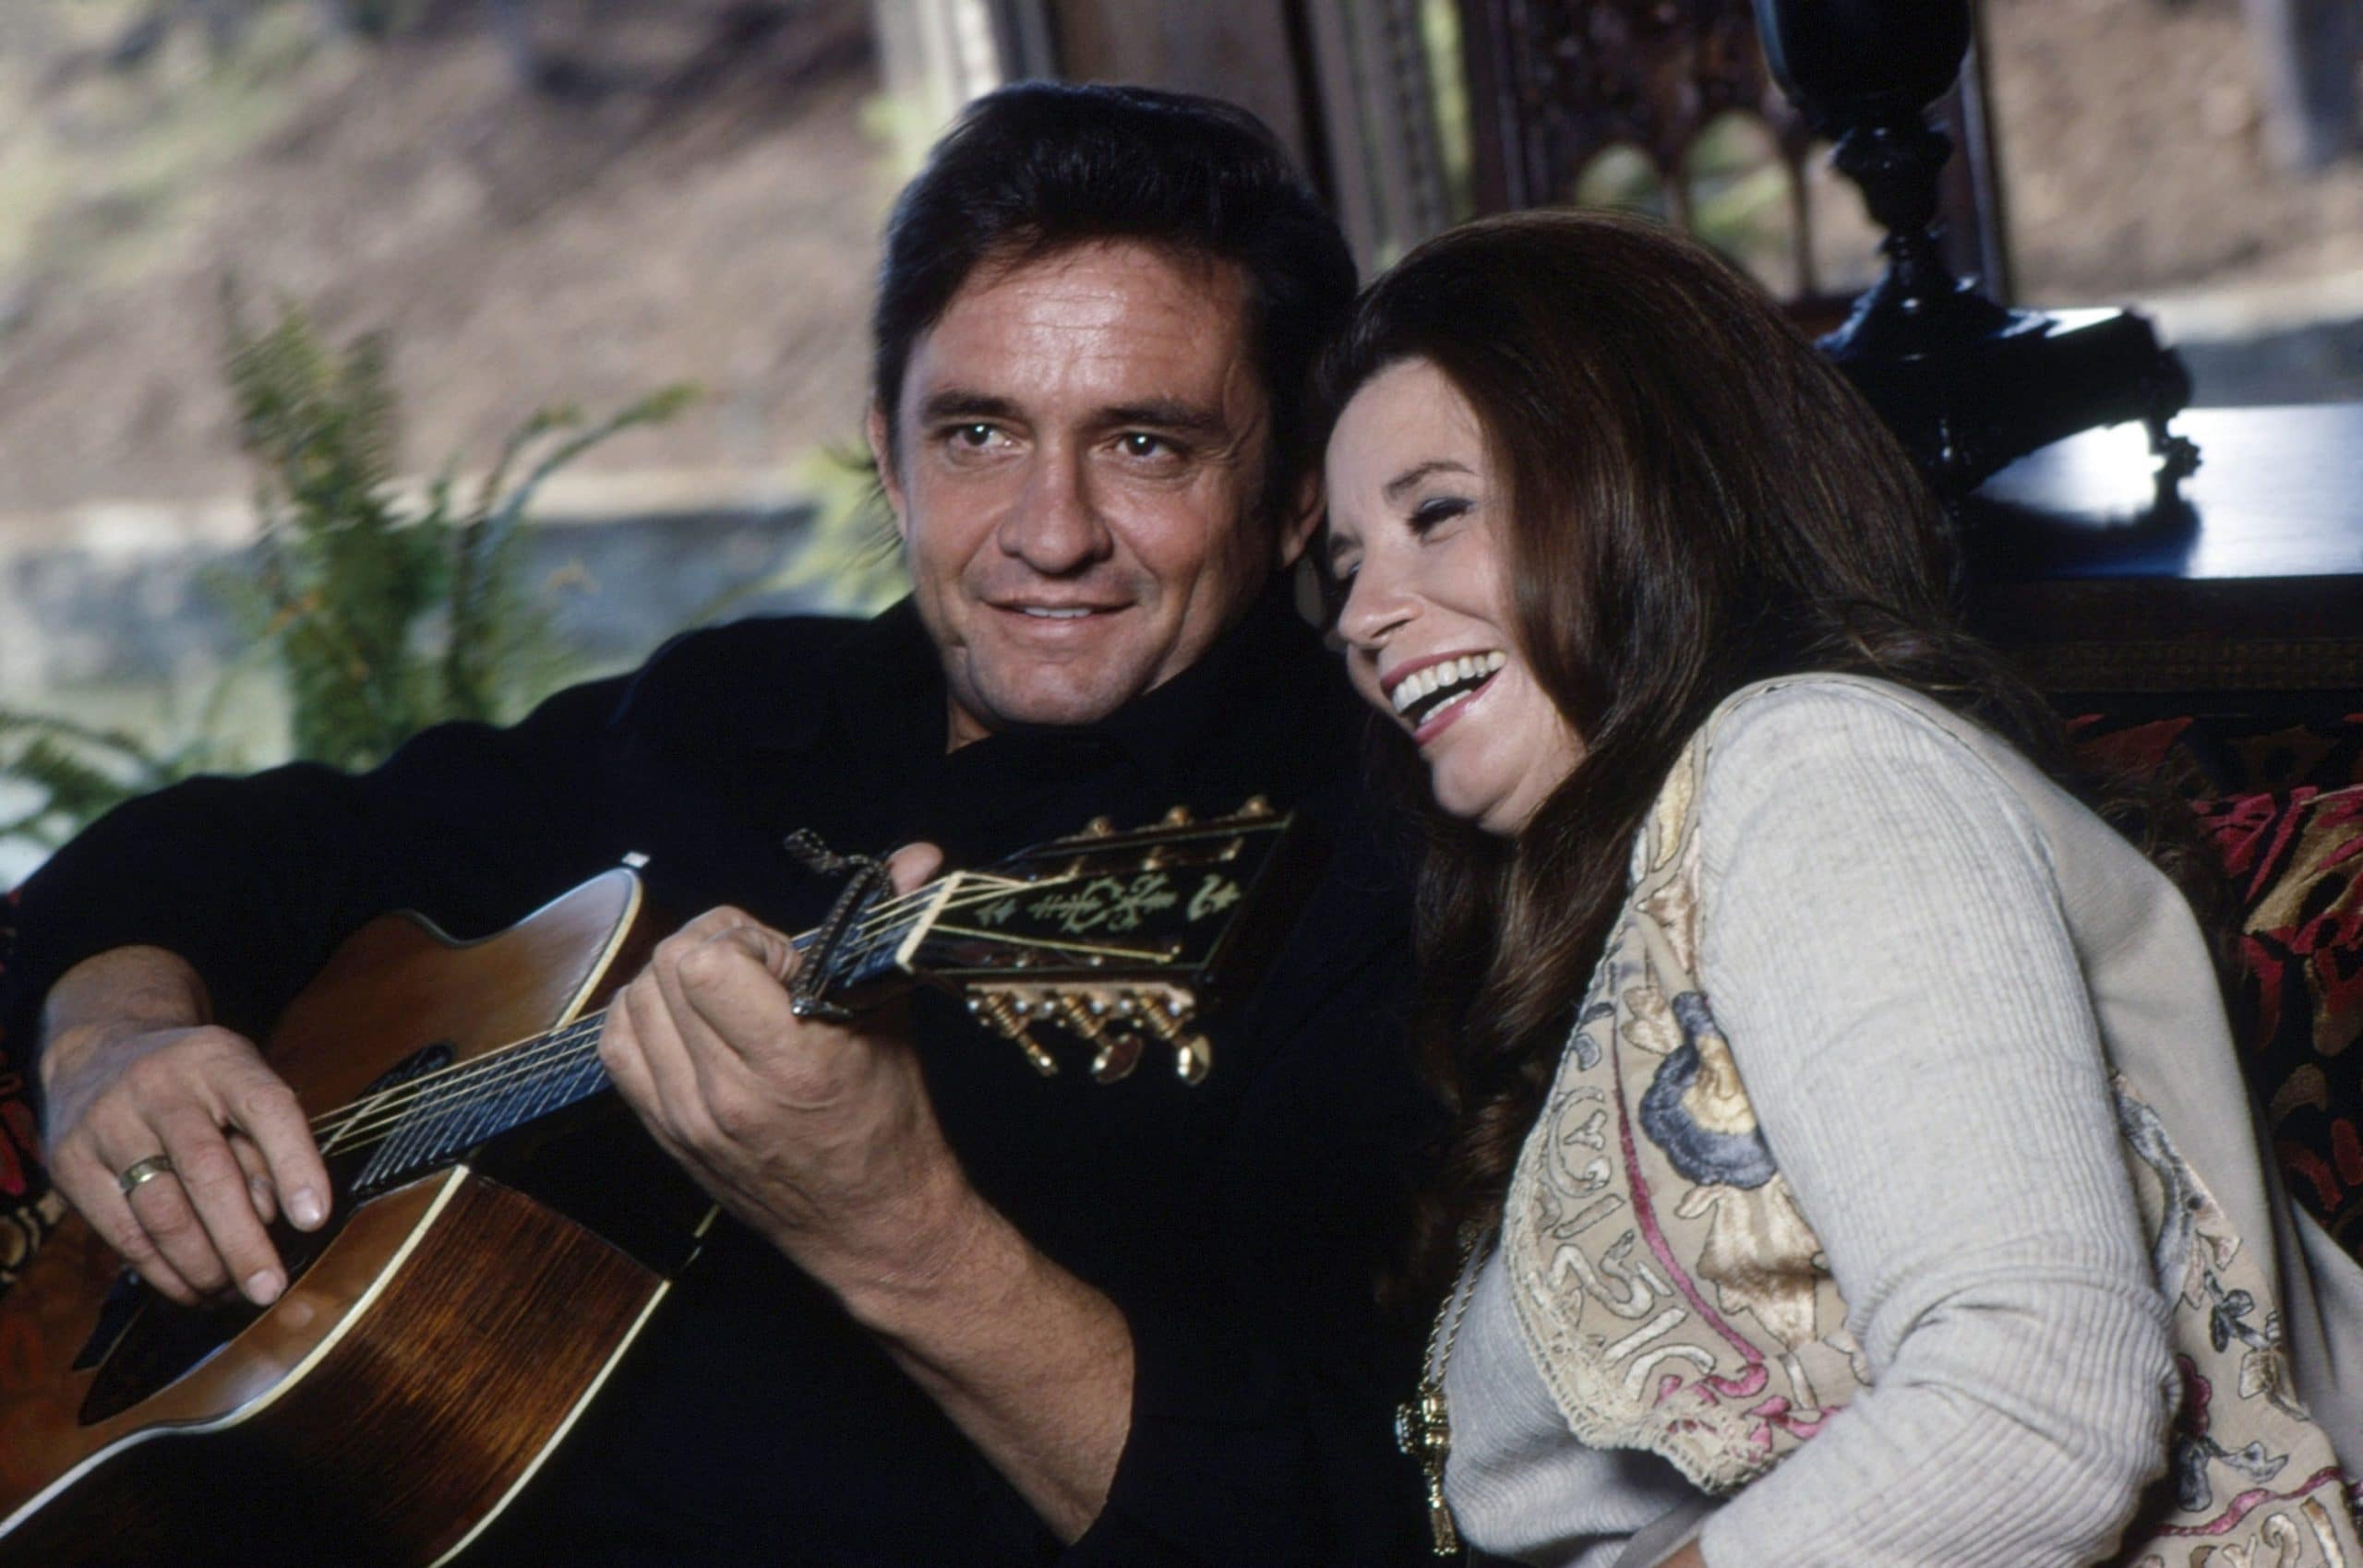 From left: Johnny Cash, June Carter Cash at home in Hendersonville, TN, circa 1970 